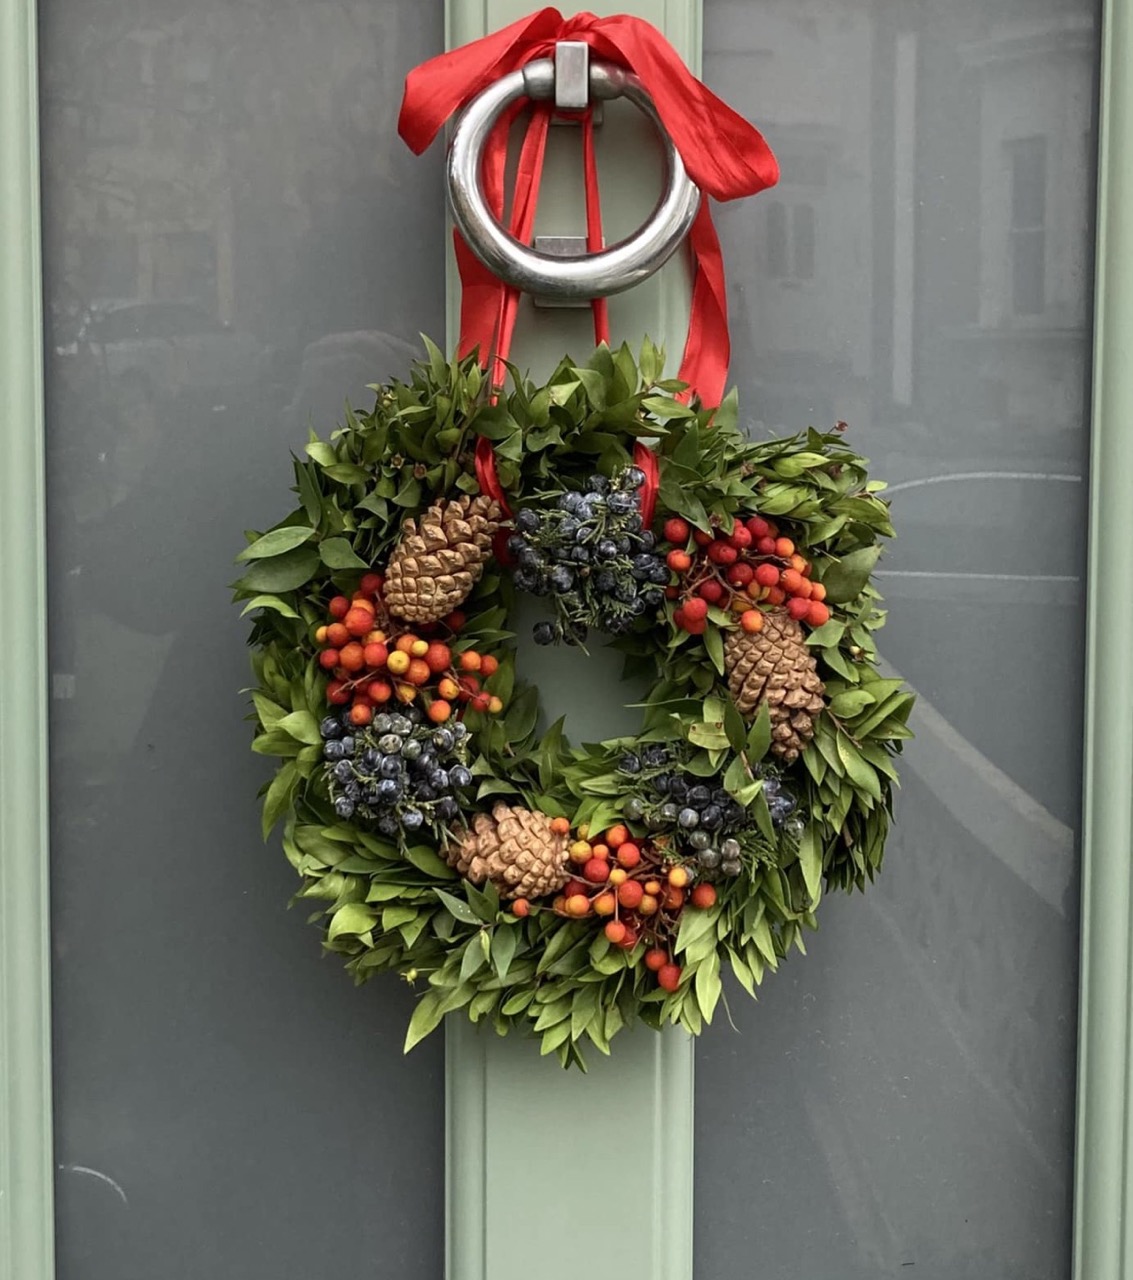 Photo of a Chriistmas wreate with green foliage, red berries and pine cones hanging from a knocker on a pale green door